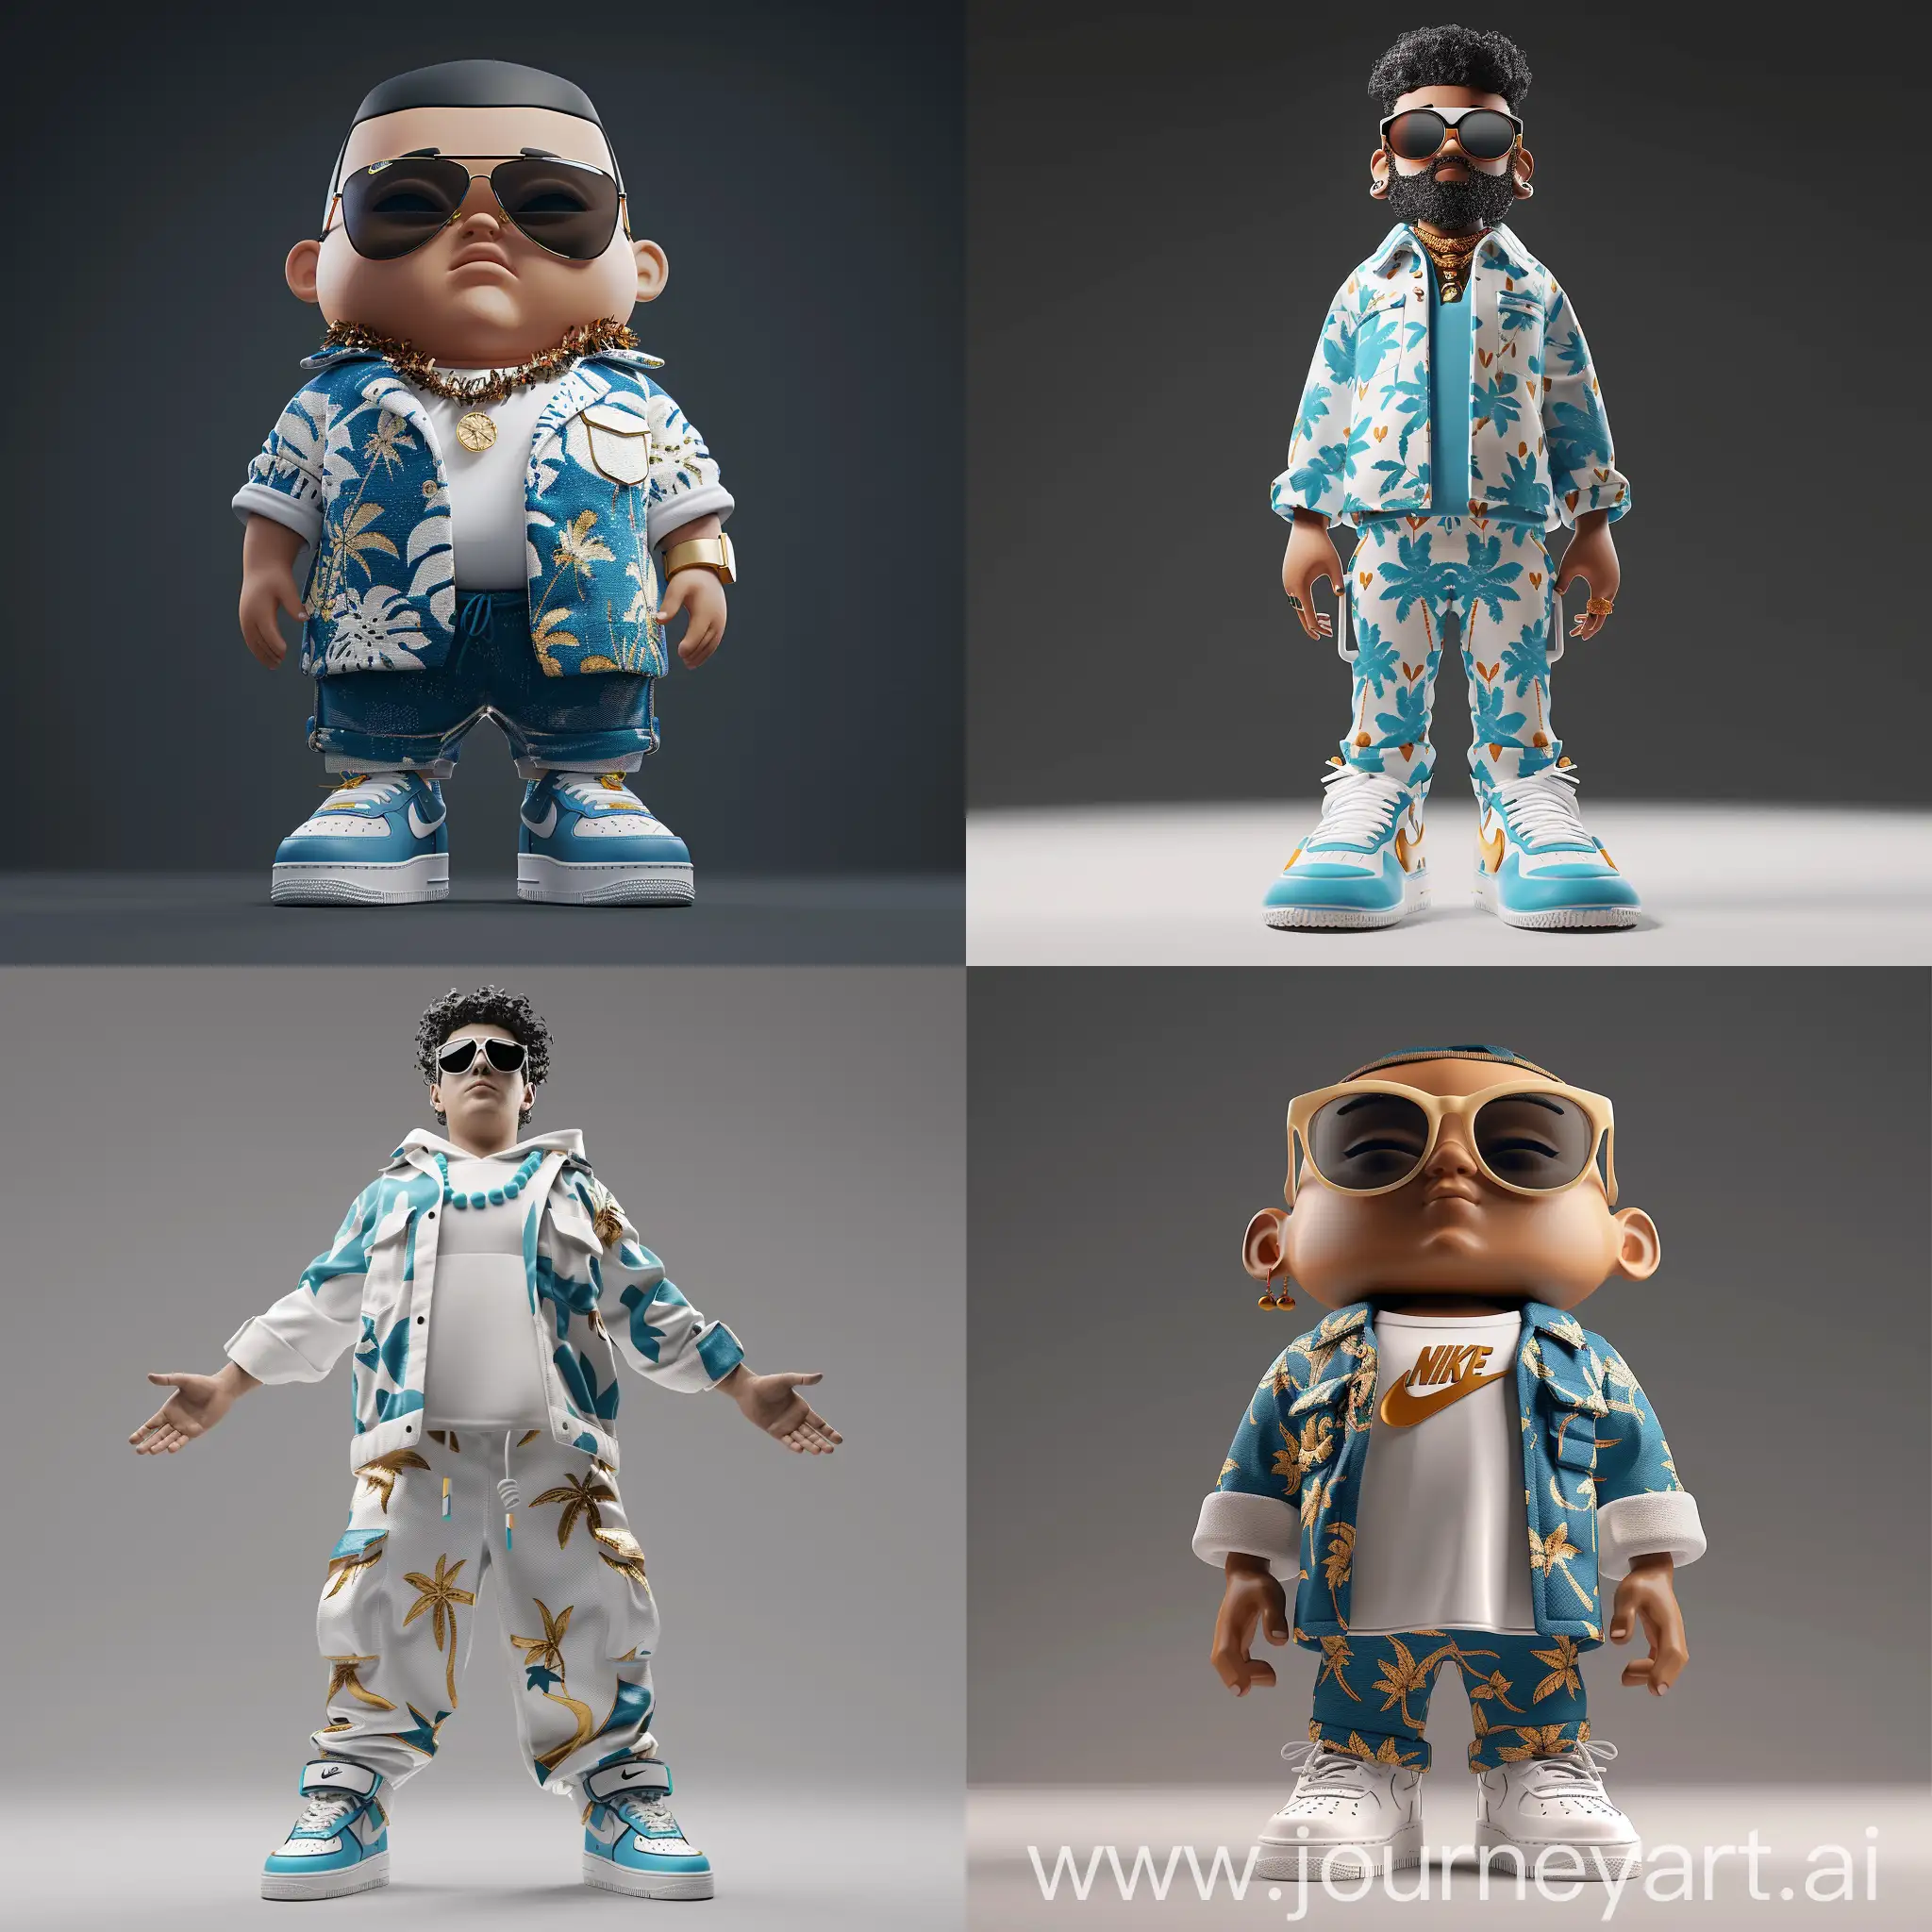 Playful-Man-in-Hawaii-Clothes-and-Sunglasses-on-Minimalistic-Background